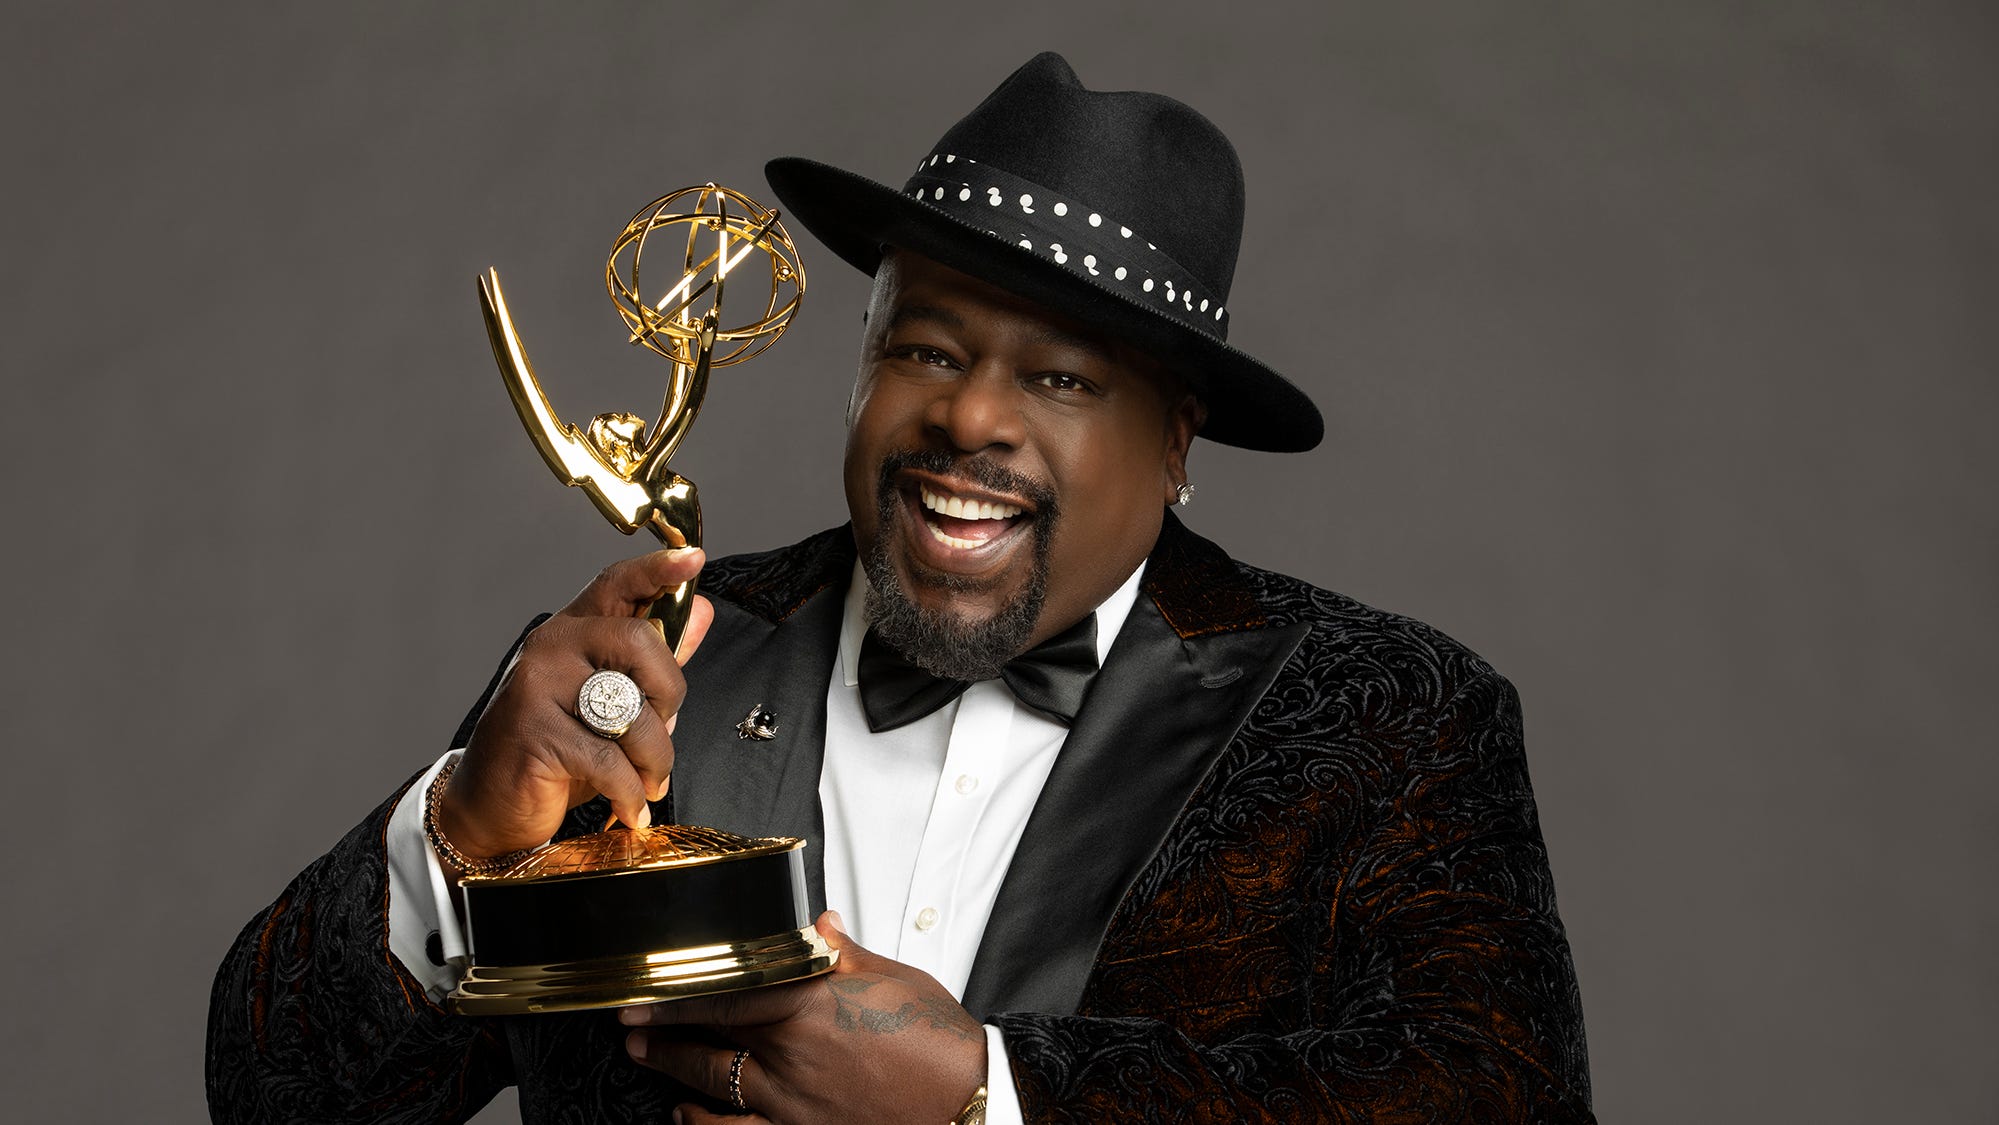 Cedric the Entertainer says scaled-down Emmys will have 'surprises'